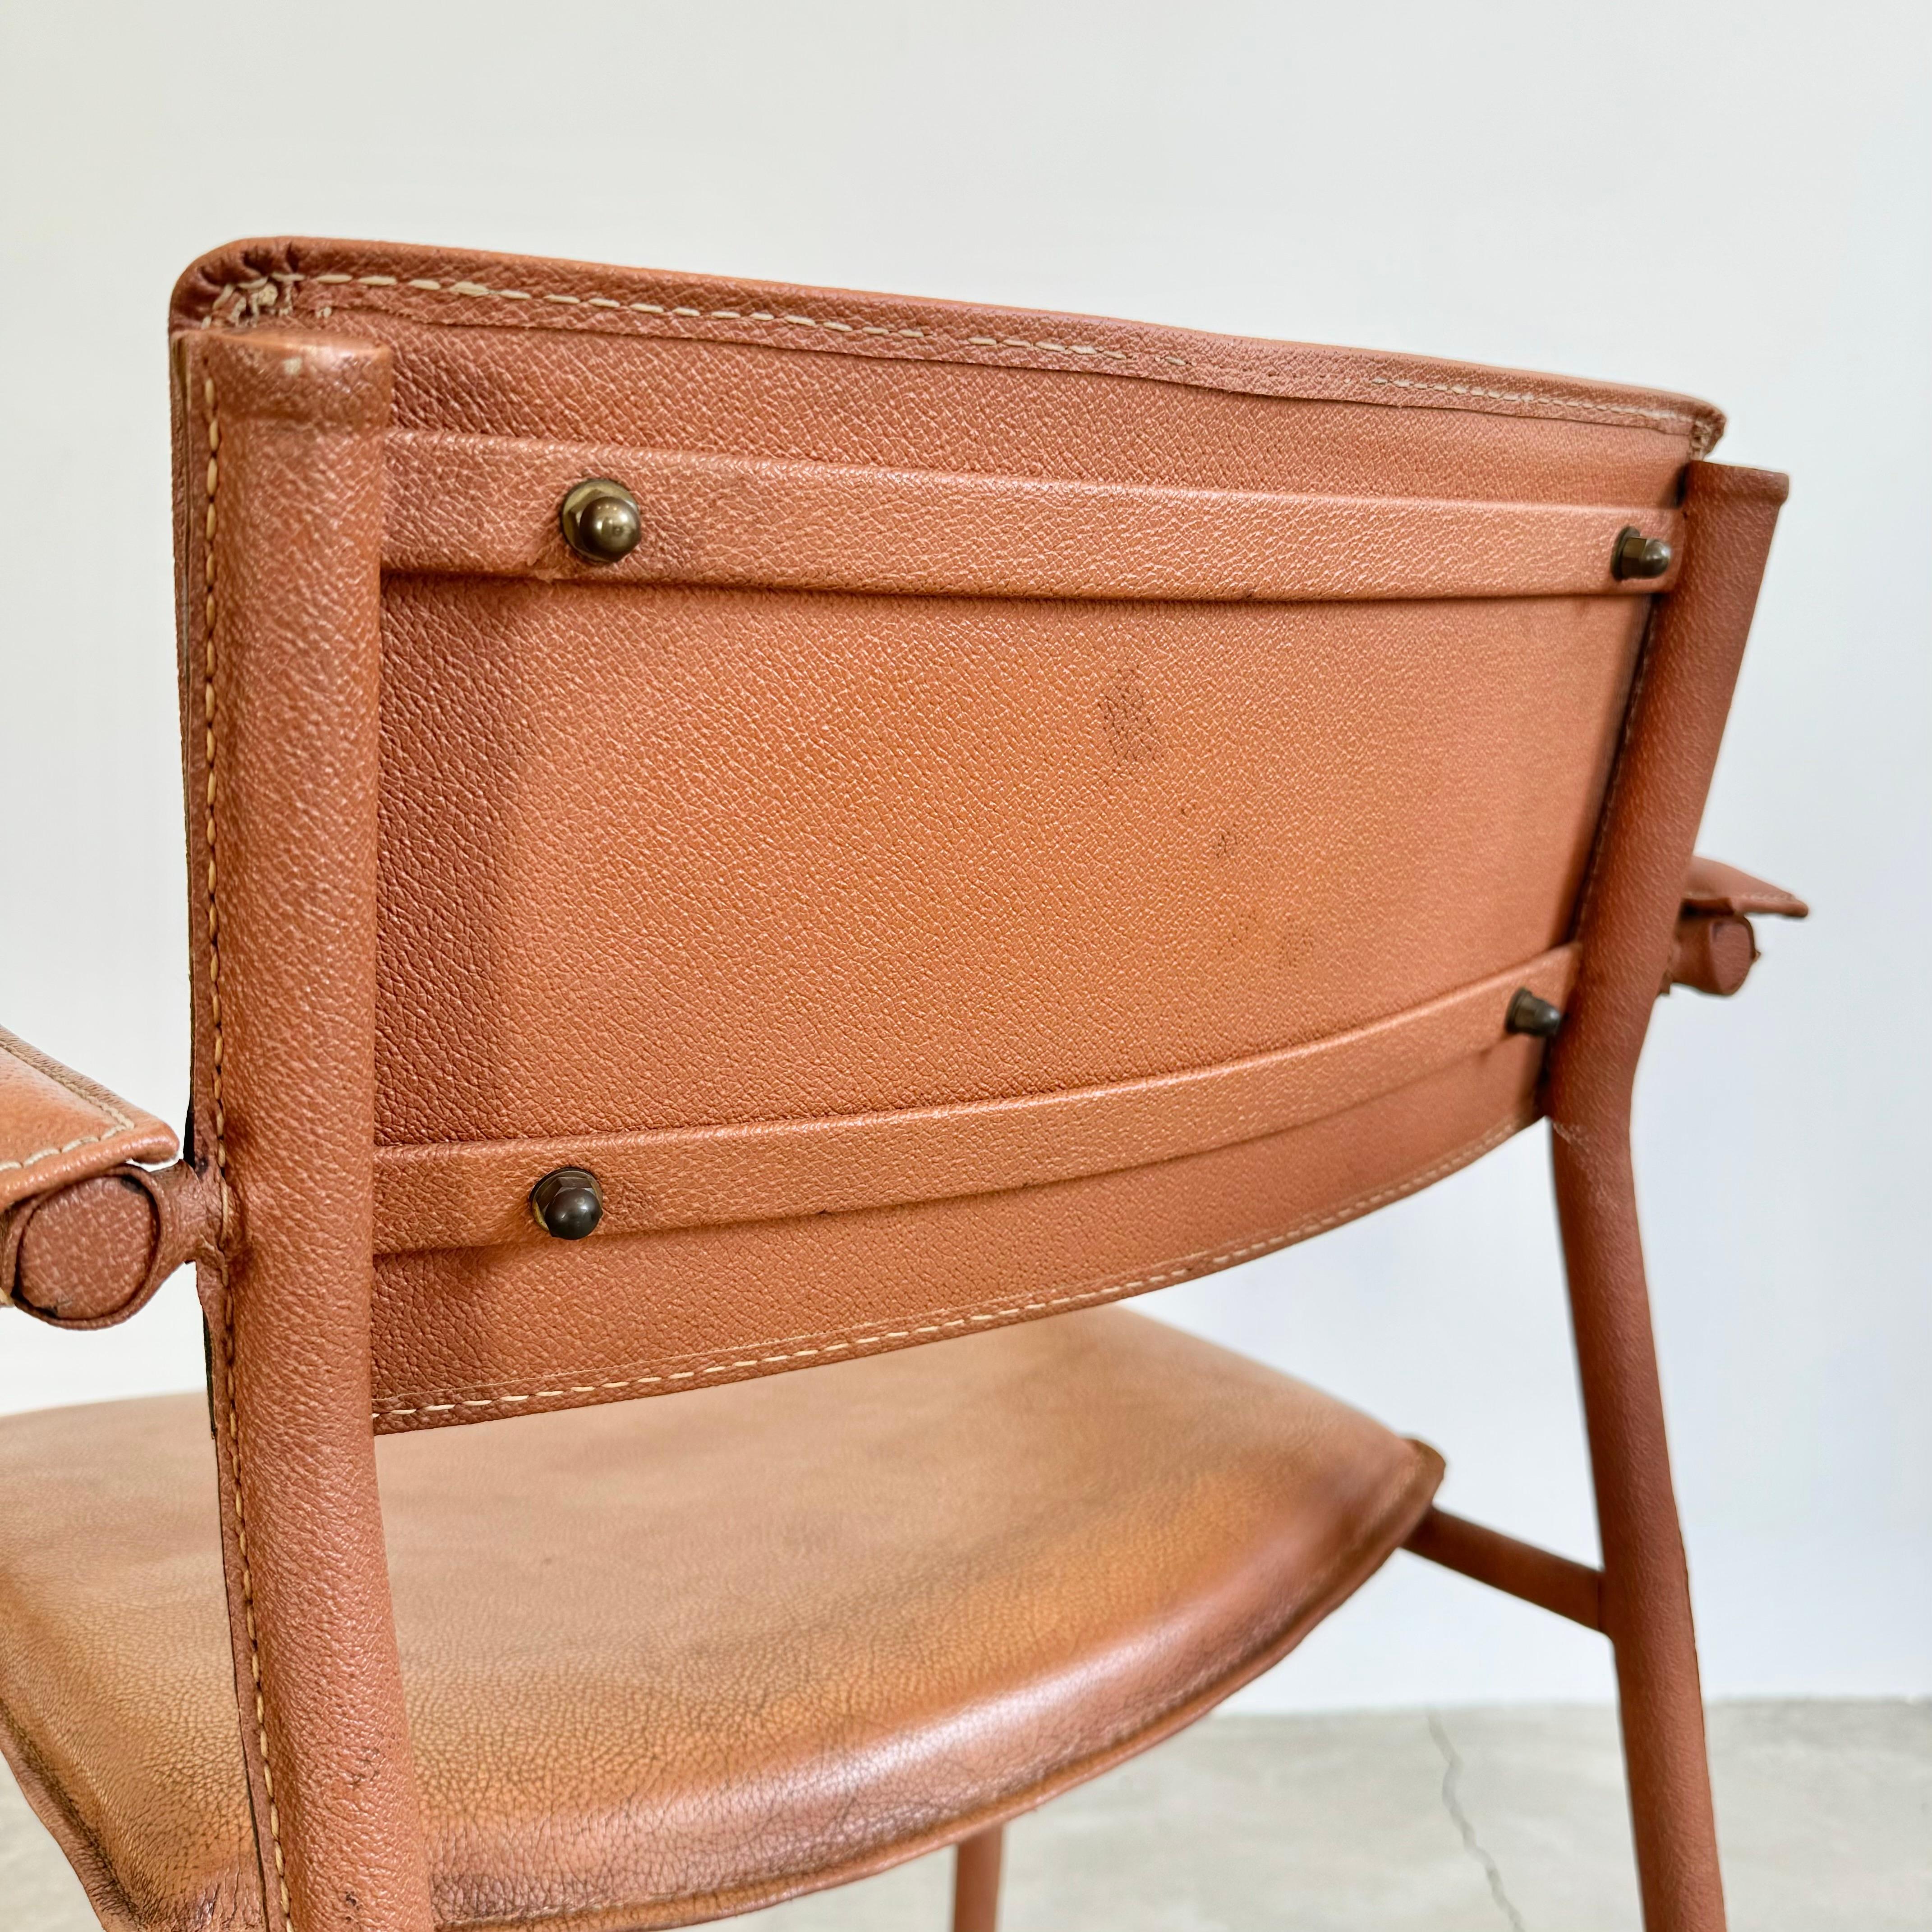 Jacques Adnet Leather Armchair, 1950s France For Sale 1